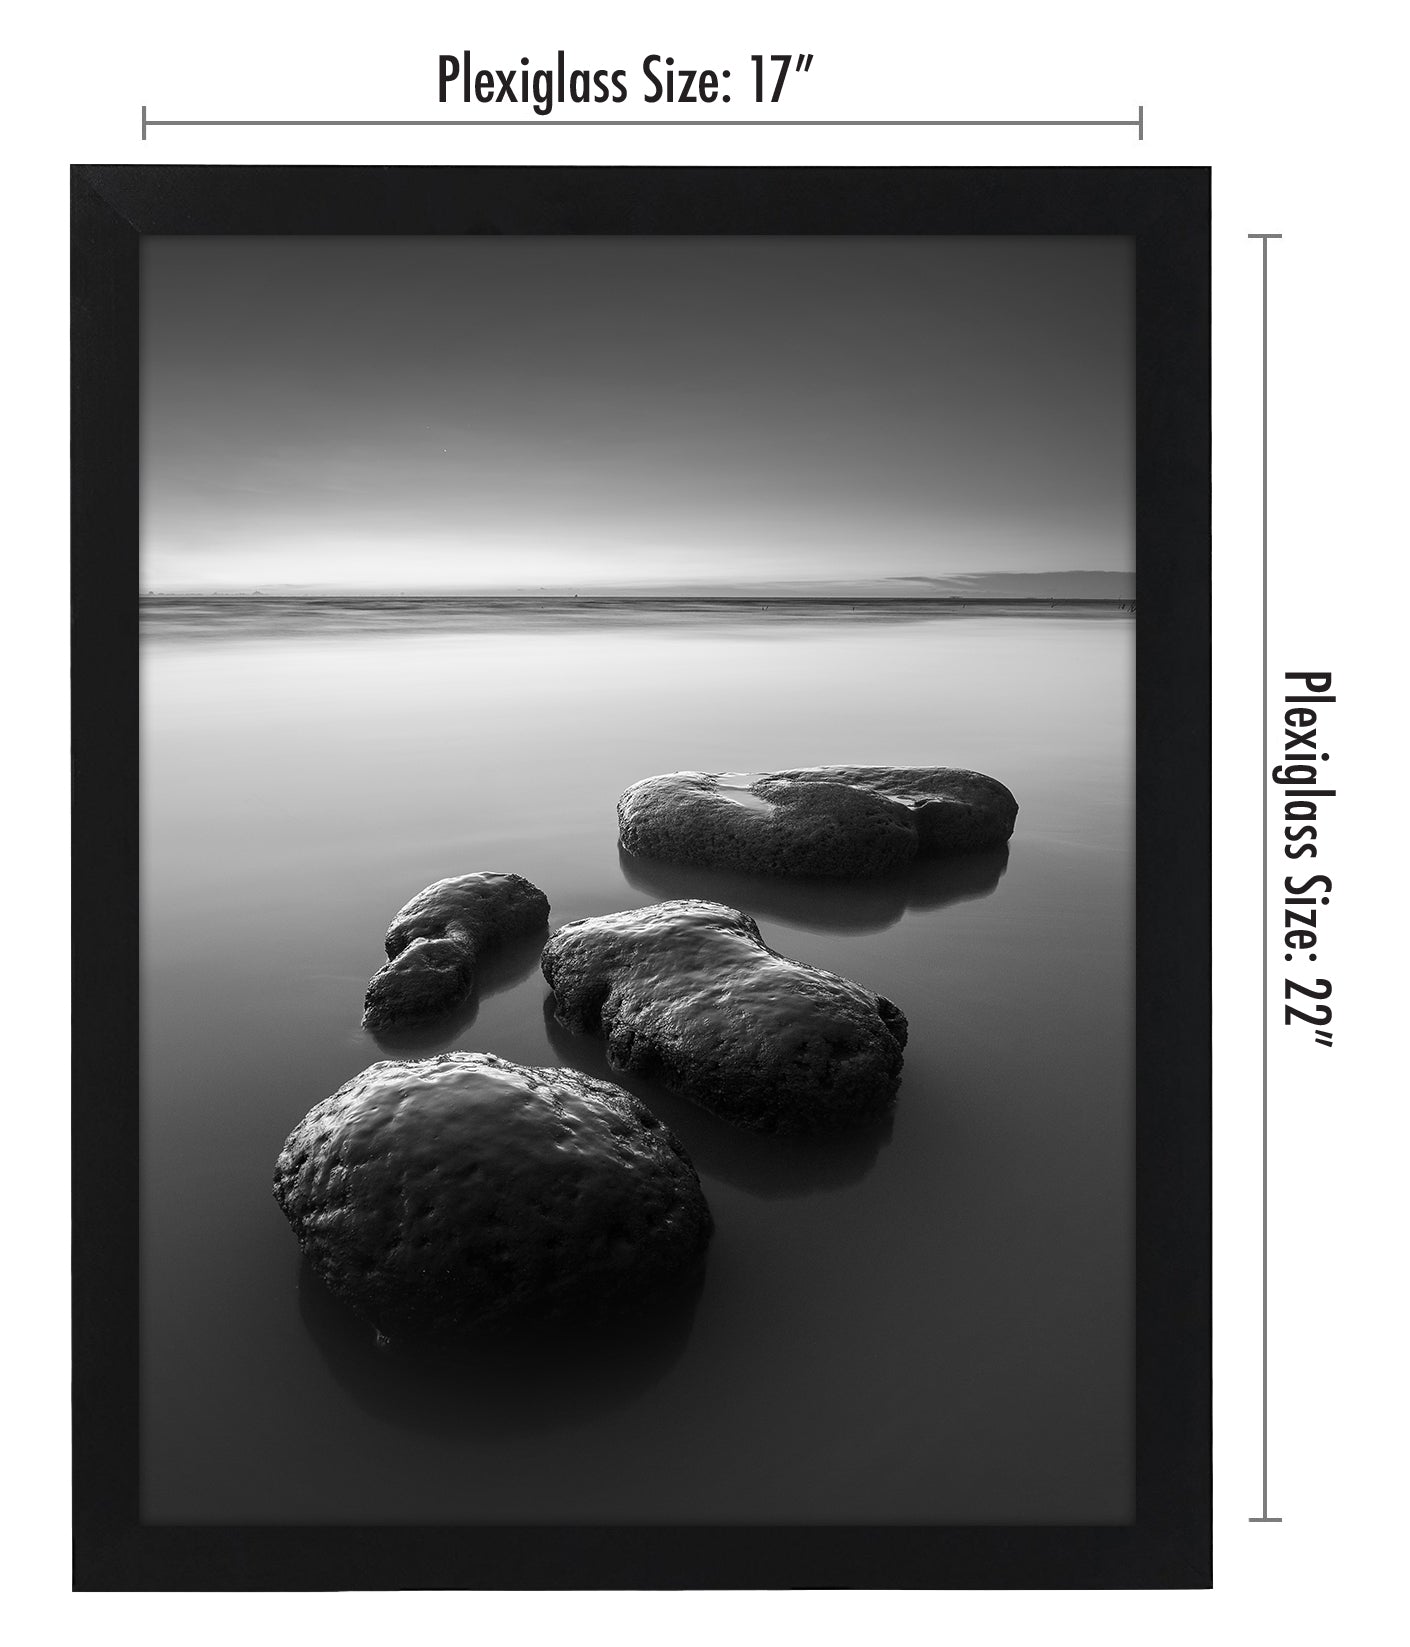 17x22 in Black - Horizontal and Vertical Formats for Wall with Included Hanging Hardware - Poster Frame